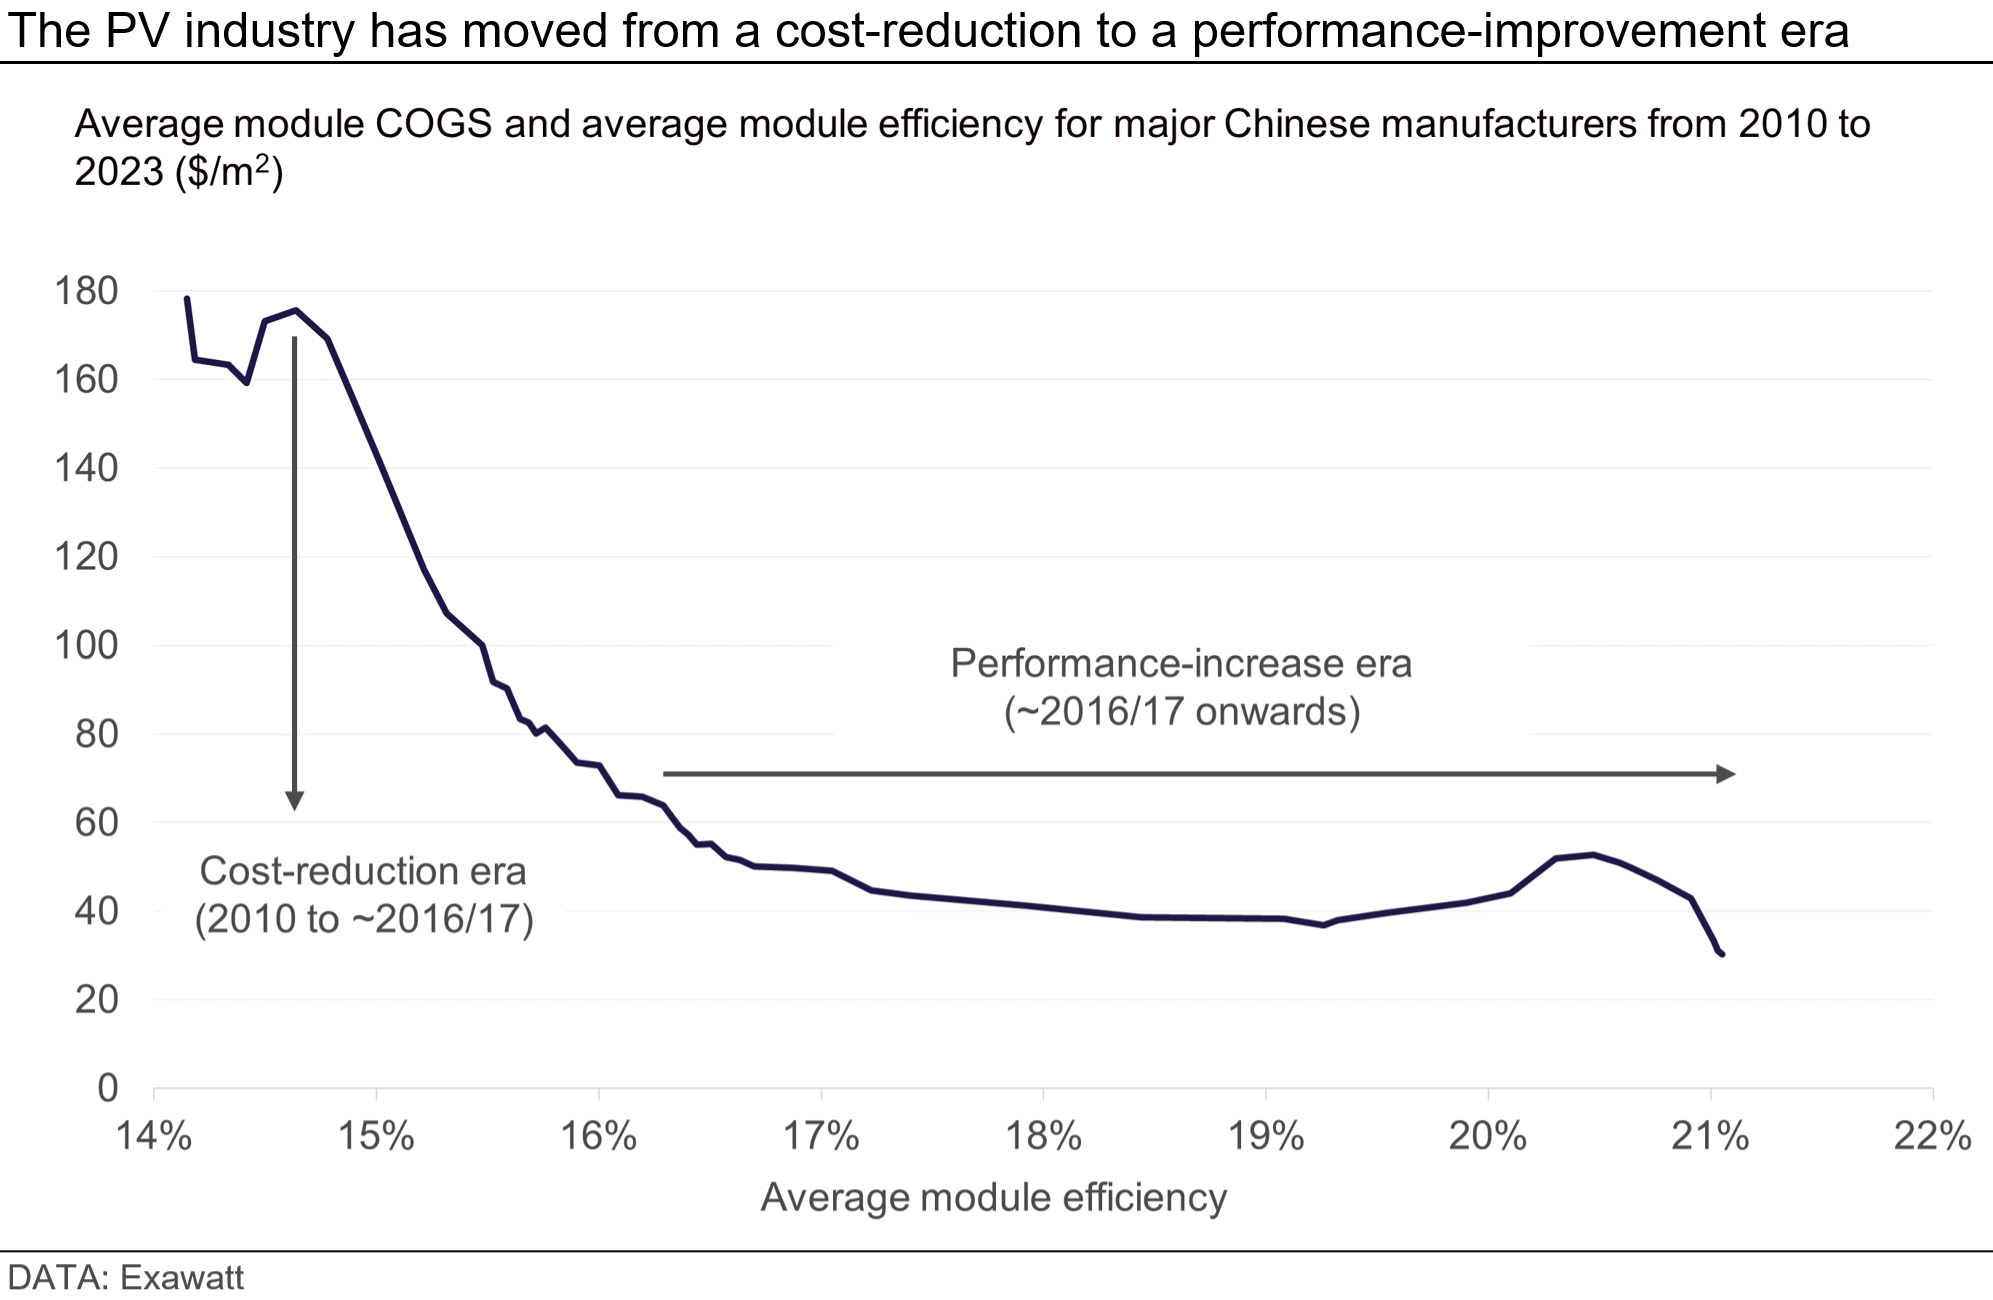 Graph showing that the PV industry has moved from a cost-reduction to a performance-improvement era